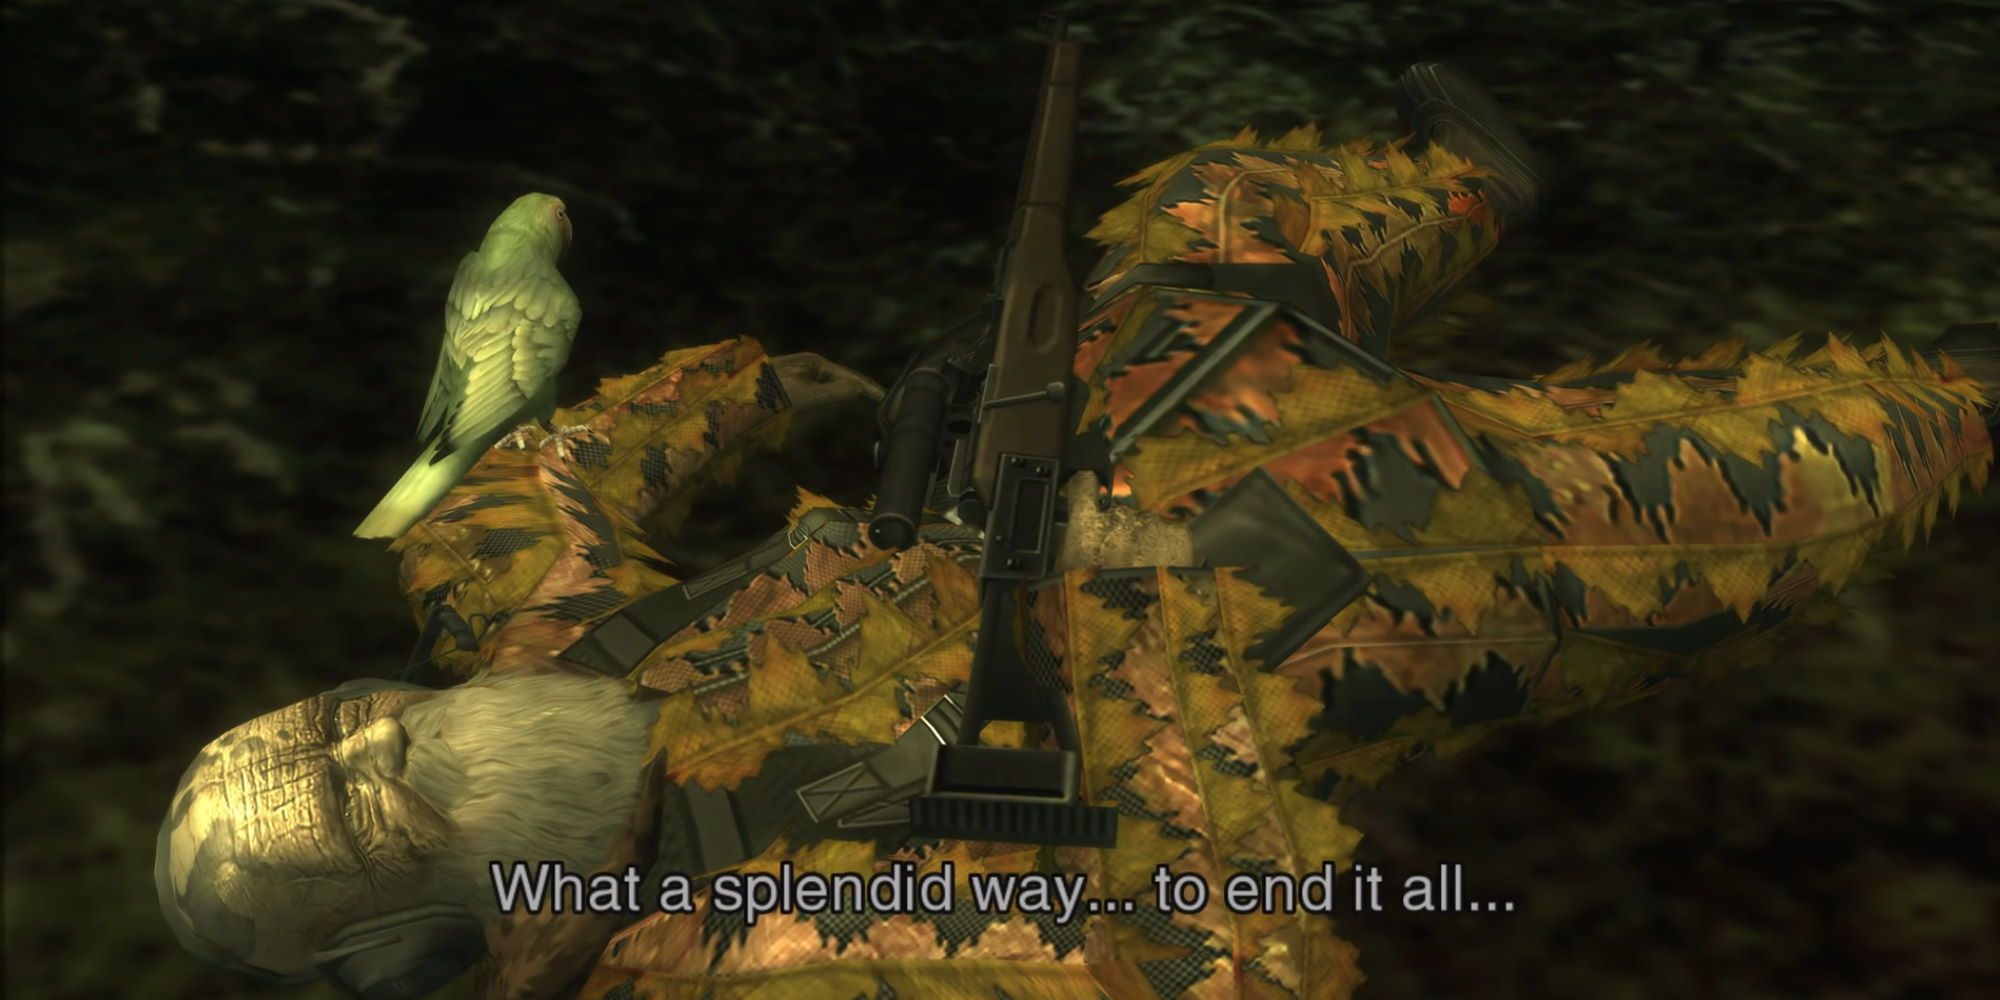 The End with his ghille suit decaying, a parrot and gun is on him in Metal Gear Solid 3